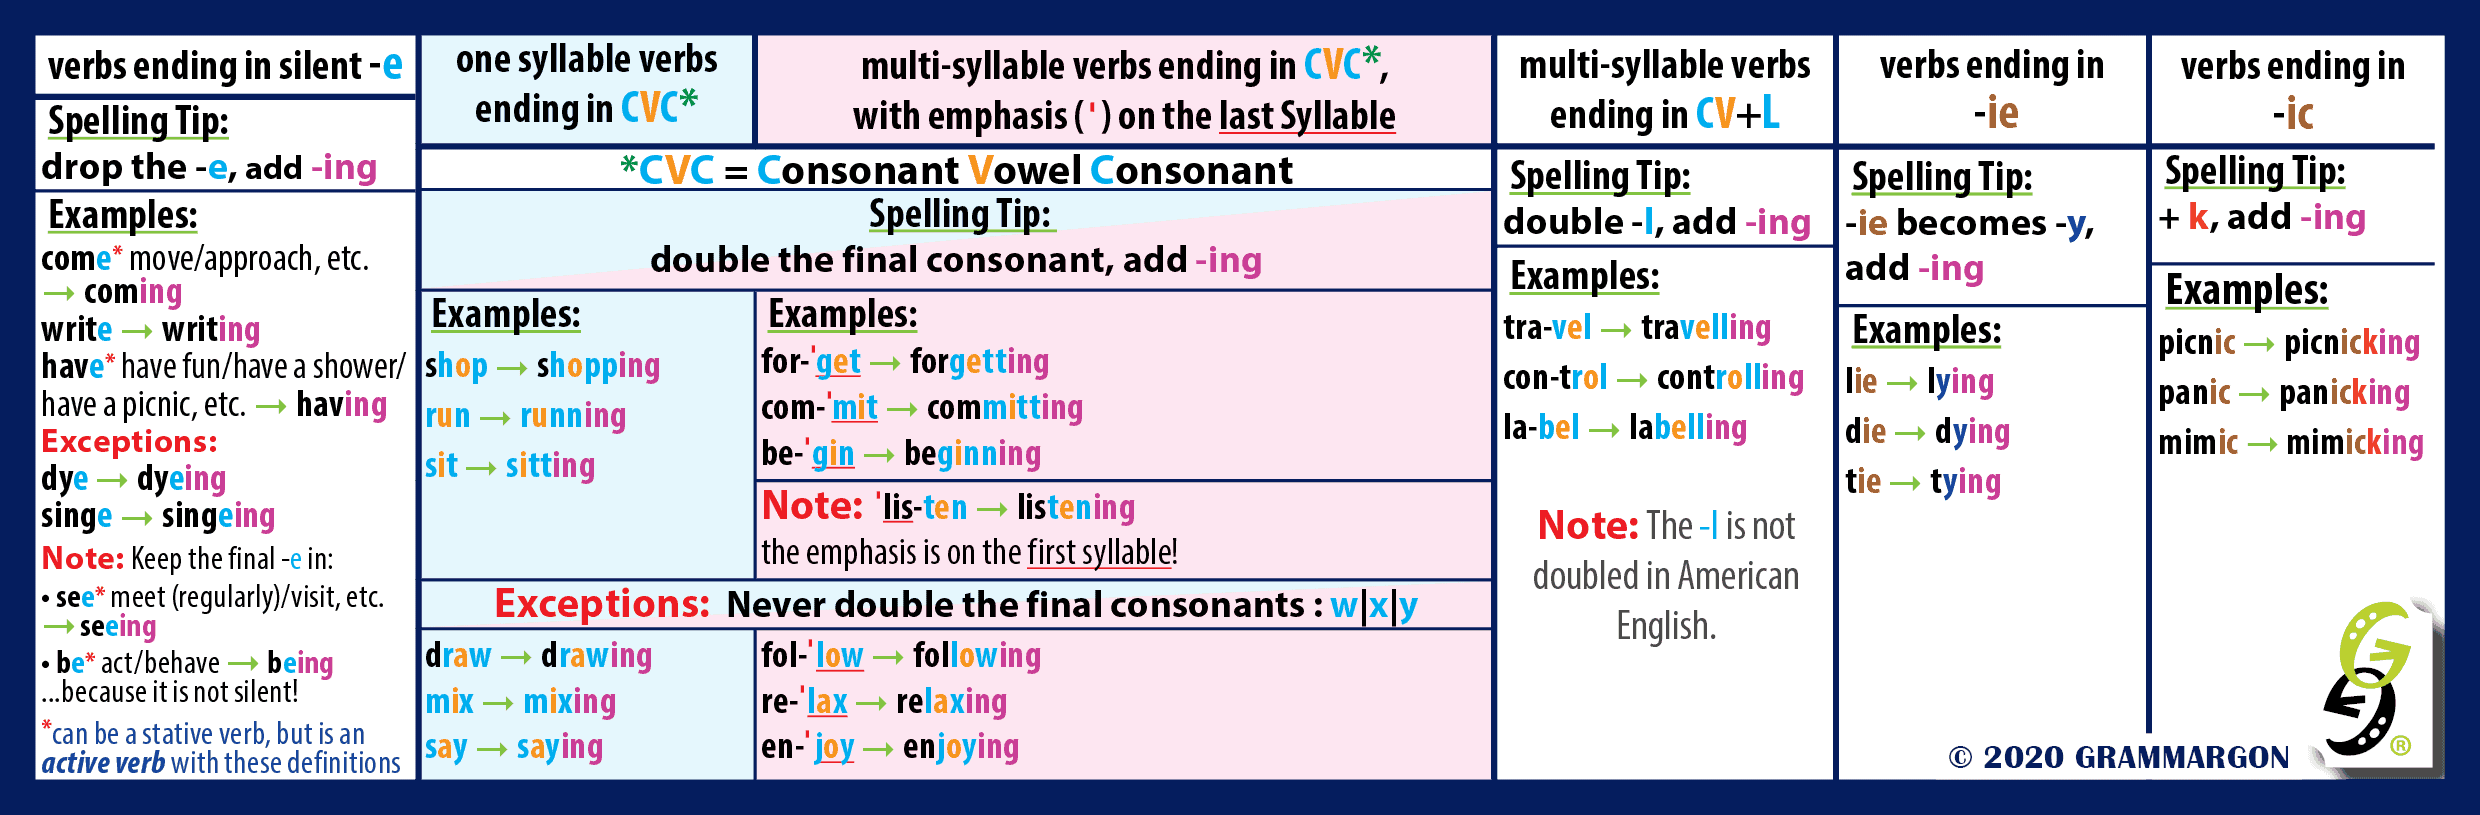 Chart containing spelling tips for adding '-ing' to verbs in the base form.